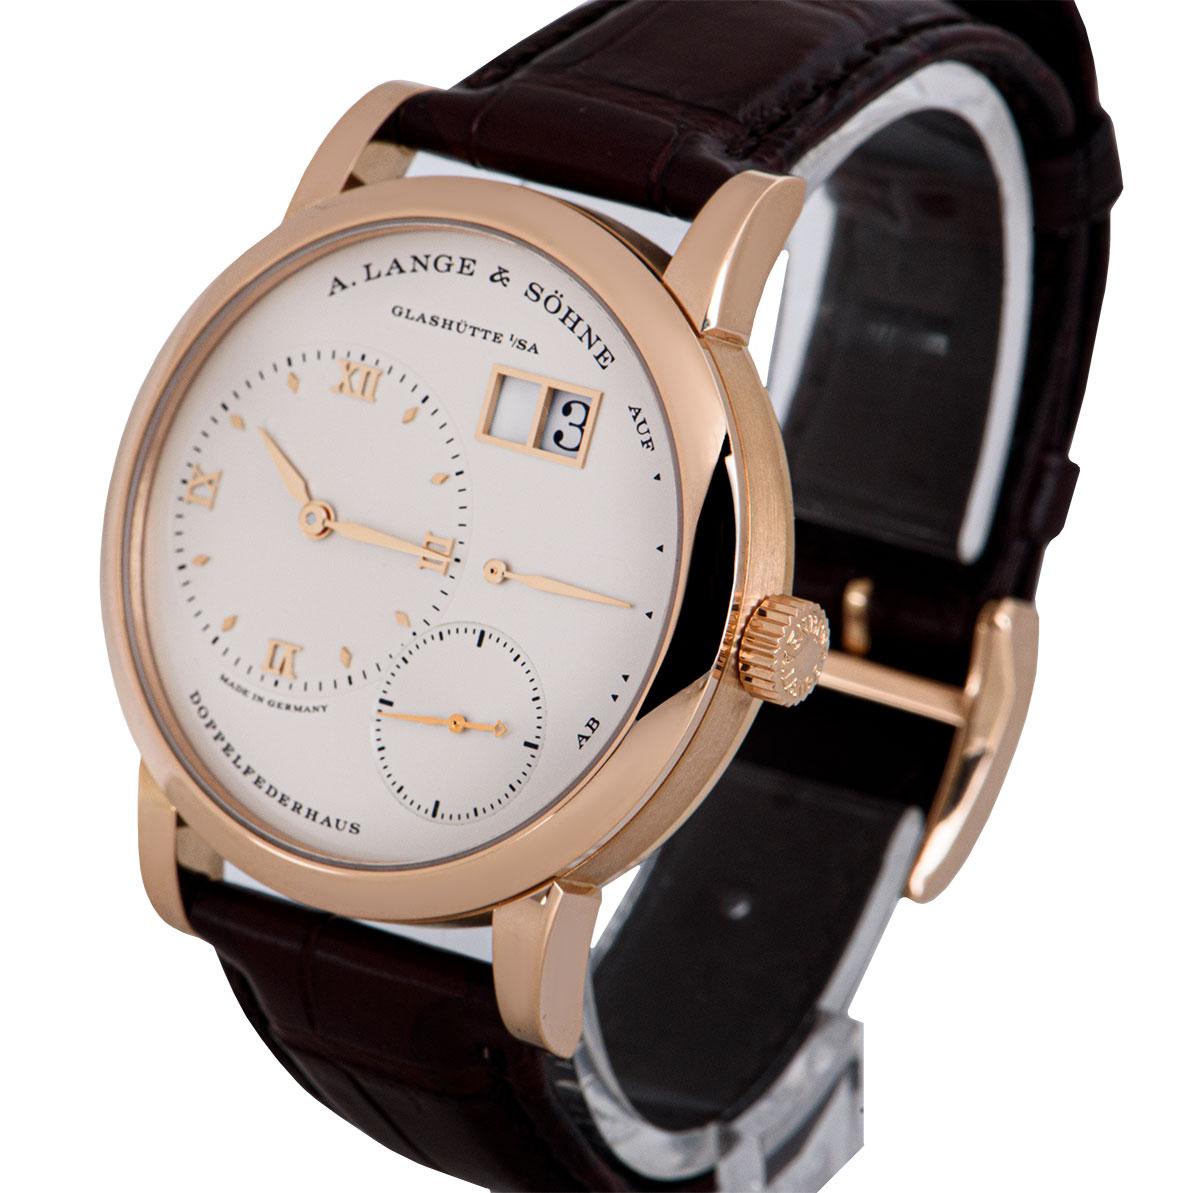 A 38.5 mm 18k Rose Gold Lange 1 Gents Wristwatch, argente silver dial - date at 1 0'clock, power reserve indicator at 3 0'clock, small seconds at 5 0'clock, argente silver off-centred dial at 9 0'clock with applied hour markers and applied roman